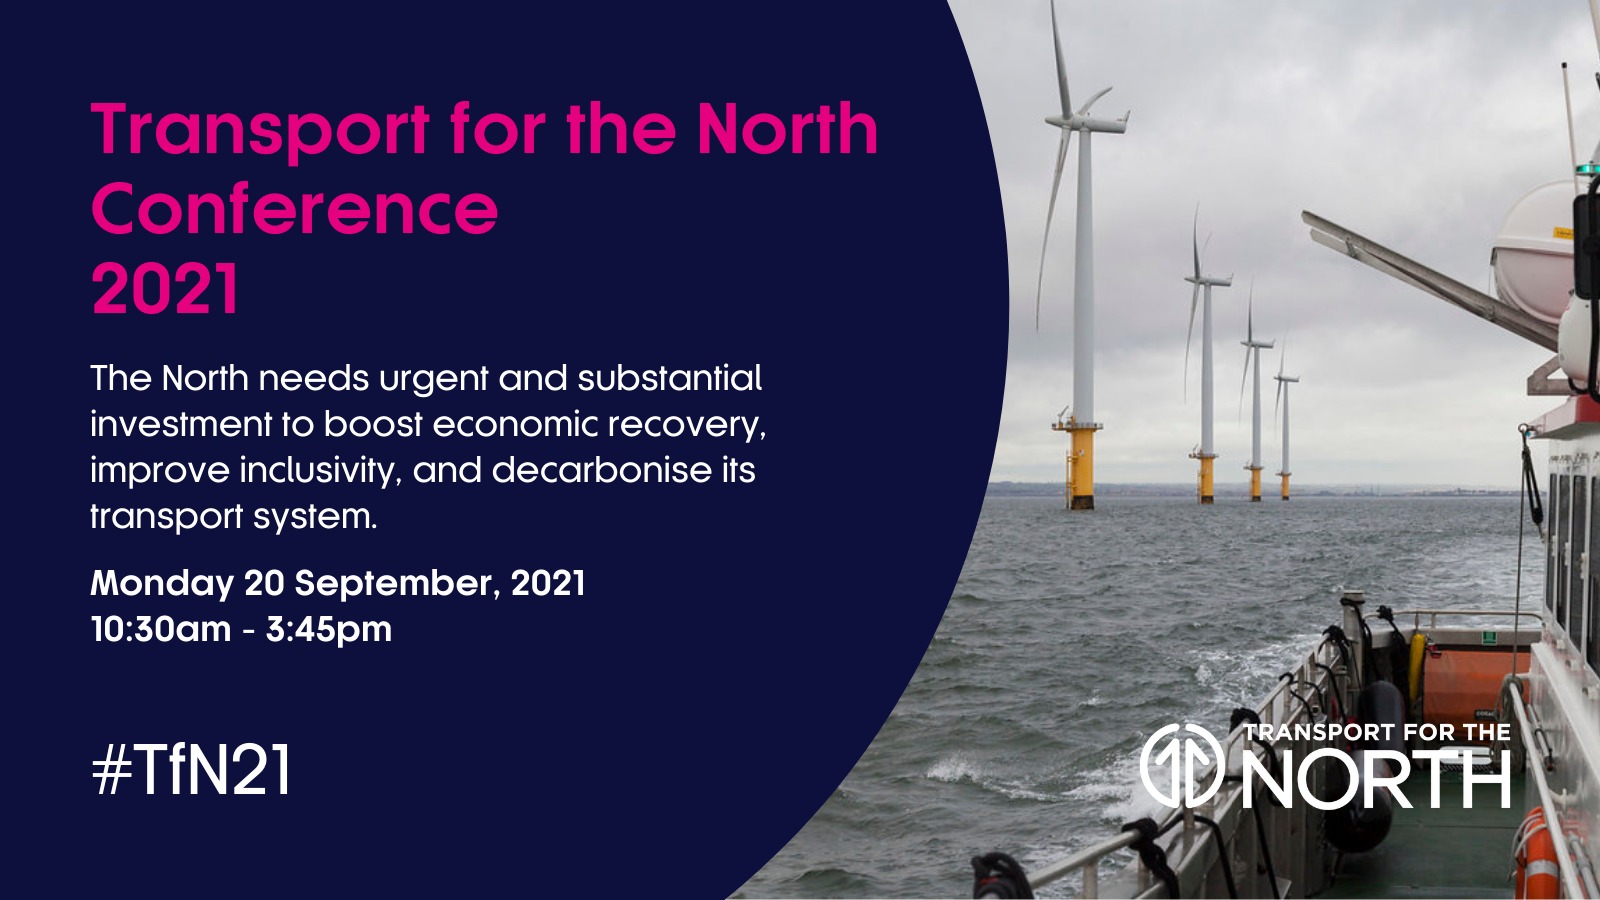 2021 TfN Conference Sustainability windfarm